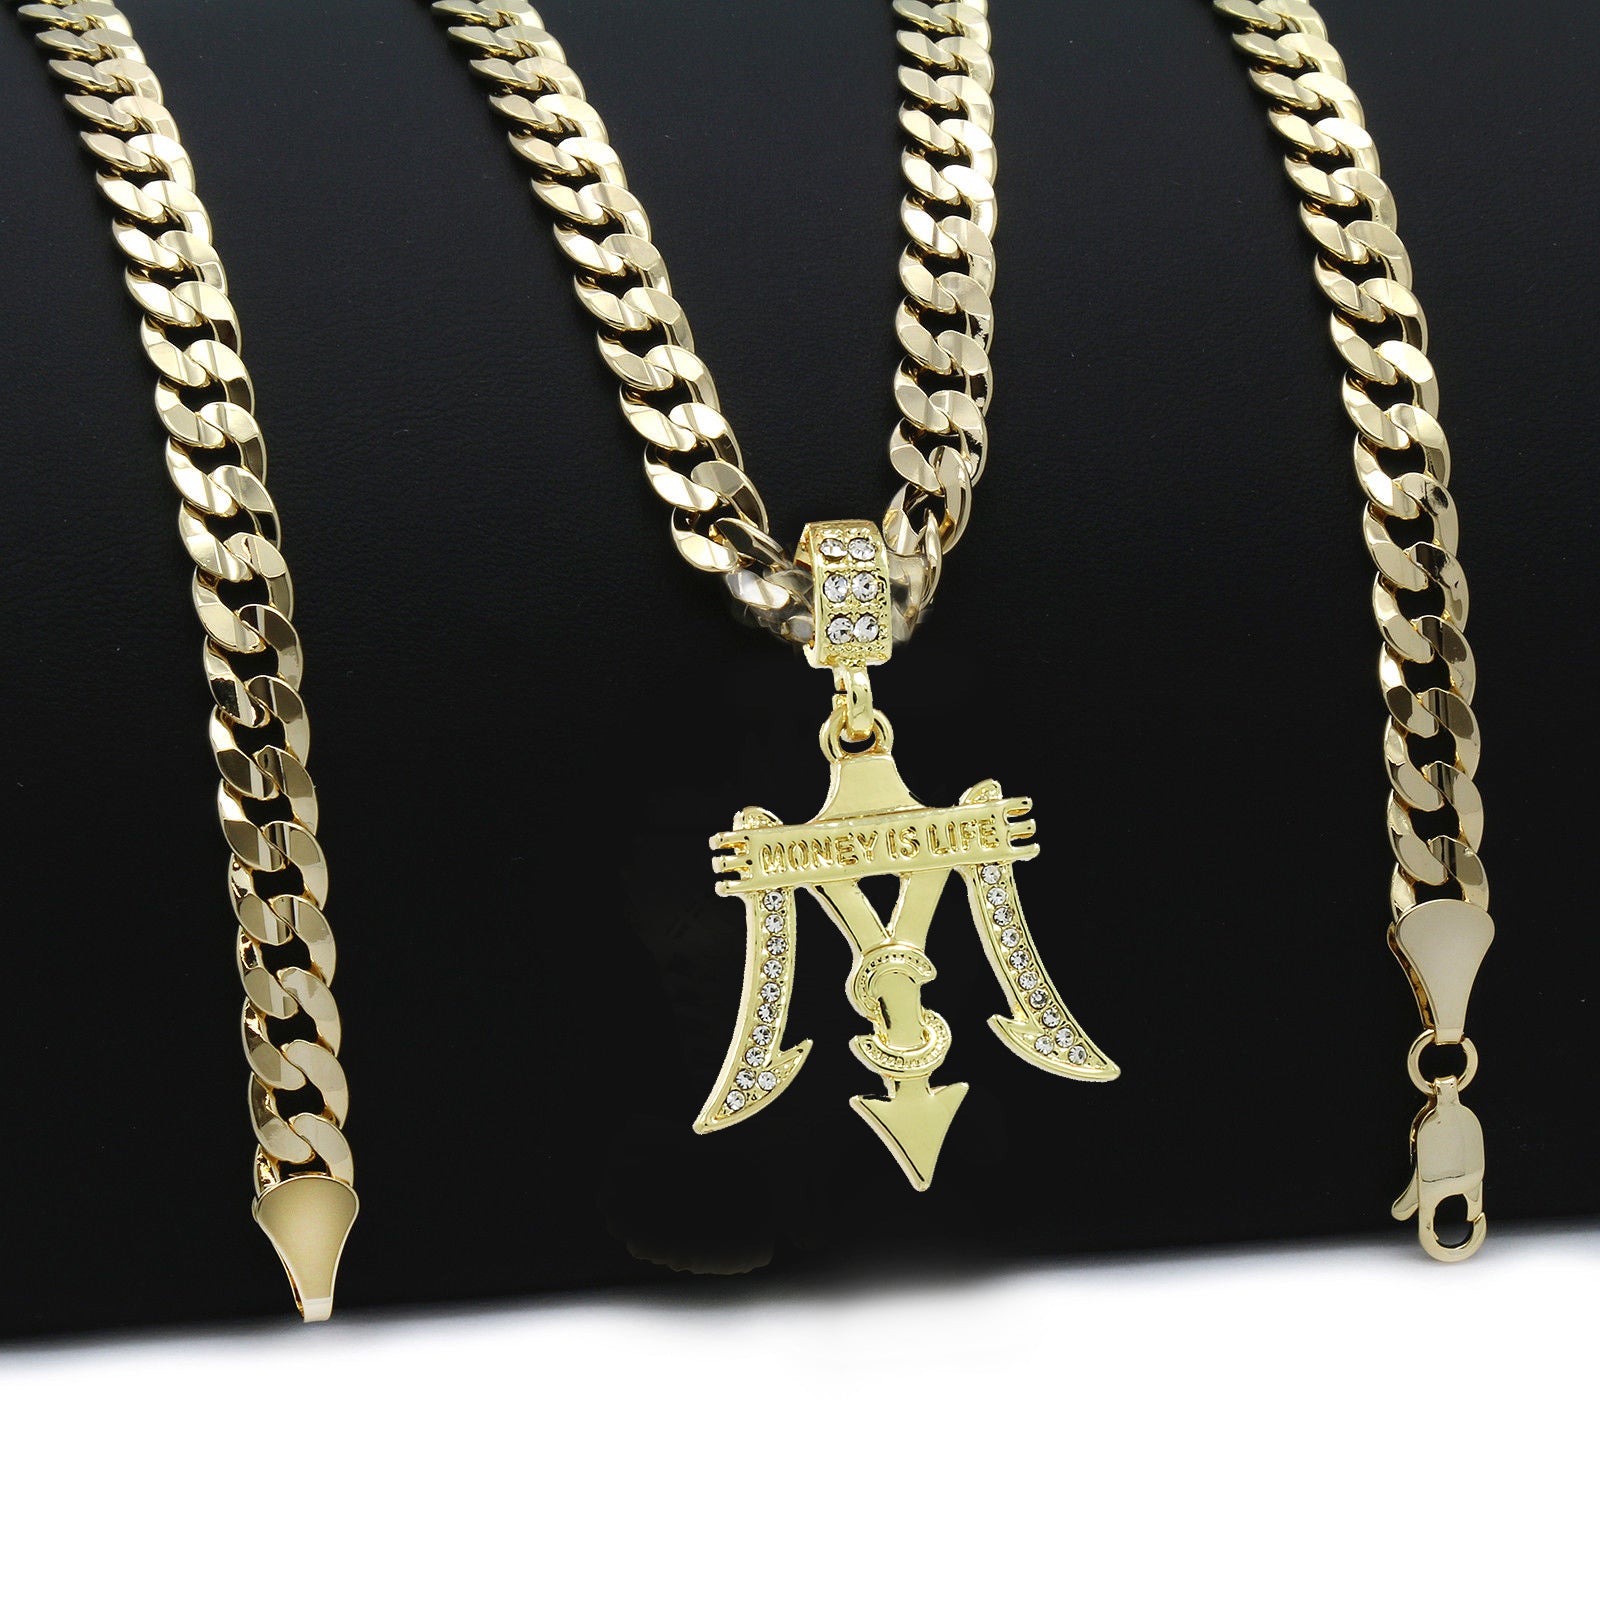 The Money Is Life Necklace